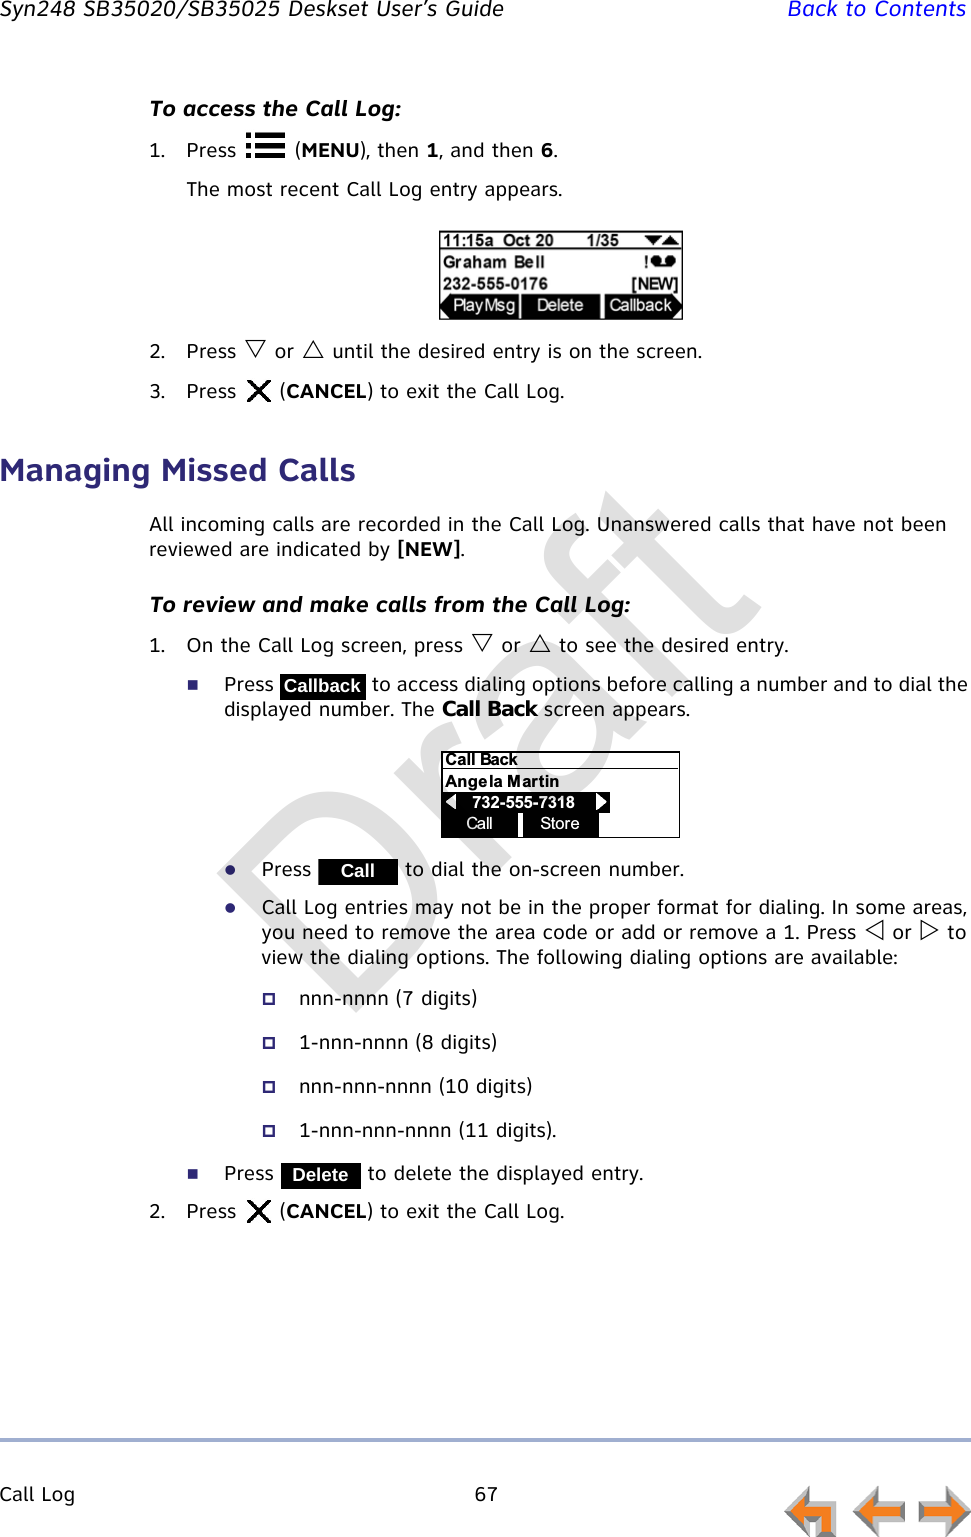 Call Log 67         Syn248 SB35020/SB35025 Deskset User’s Guide Back to ContentsTo access the Call Log:1. Press  (MENU), then 1, and then 6.The most recent Call Log entry appears.2. Press  or  until the desired entry is on the screen.3. Press  (CANCEL) to exit the Call Log.Managing Missed CallsAll incoming calls are recorded in the Call Log. Unanswered calls that have not been reviewed are indicated by [NEW].To review and make calls from the Call Log:1. On the Call Log screen, press  or  to see the desired entry.Press   to access dialing options before calling a number and to dial the displayed number. The Call Back screen appears.Press   to dial the on-screen number.Call Log entries may not be in the proper format for dialing. In some areas, you need to remove the area code or add or remove a 1. Press  or  to view the dialing options. The following dialing options are available:nnn-nnnn (7 digits)1-nnn-nnnn (8 digits)nnn-nnn-nnnn (10 digits)1-nnn-nnn-nnnn (11 digits).Press   to delete the displayed entry.2. Press  (CANCEL) to exit the Call Log.CallbackCall StoreCall BackAngela Martin            732-555-7318                    CallDeleteDraft